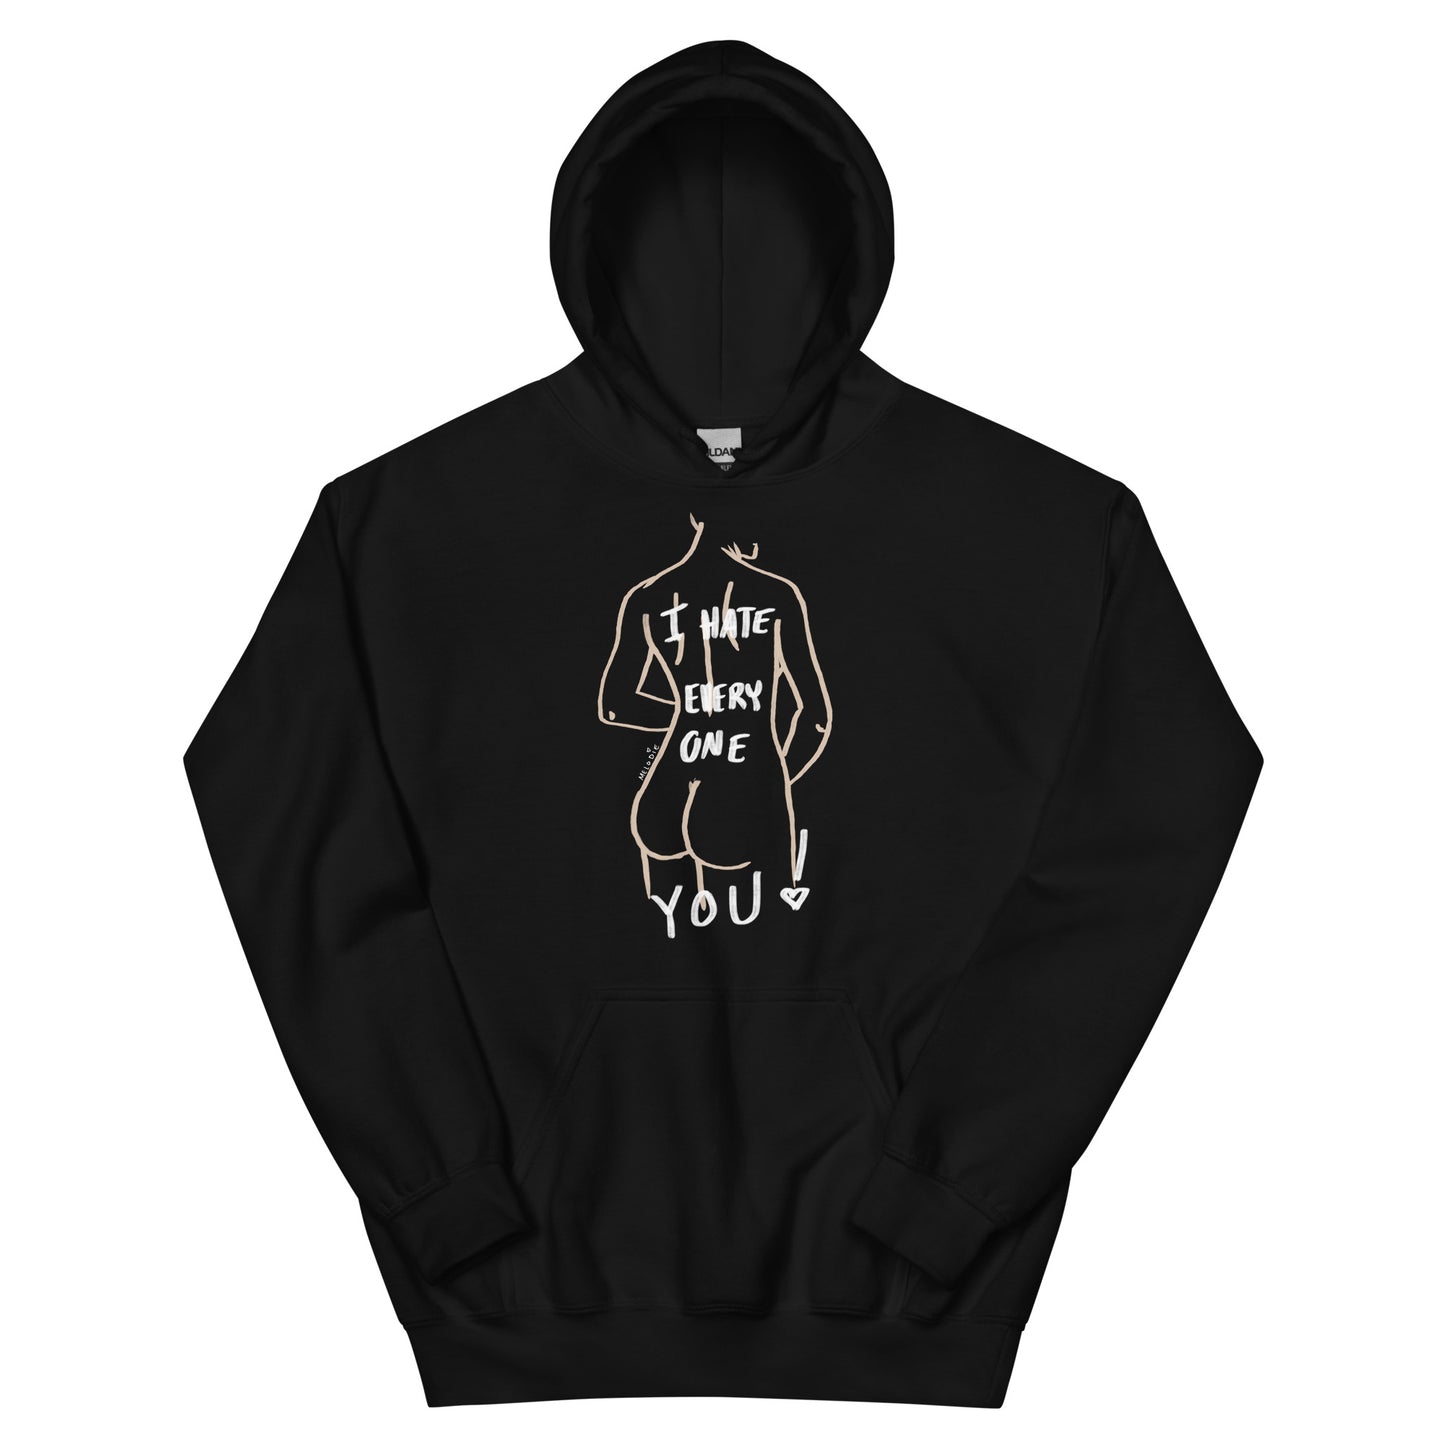 " I Hate Everyone Butt You " Unisex Hoodie